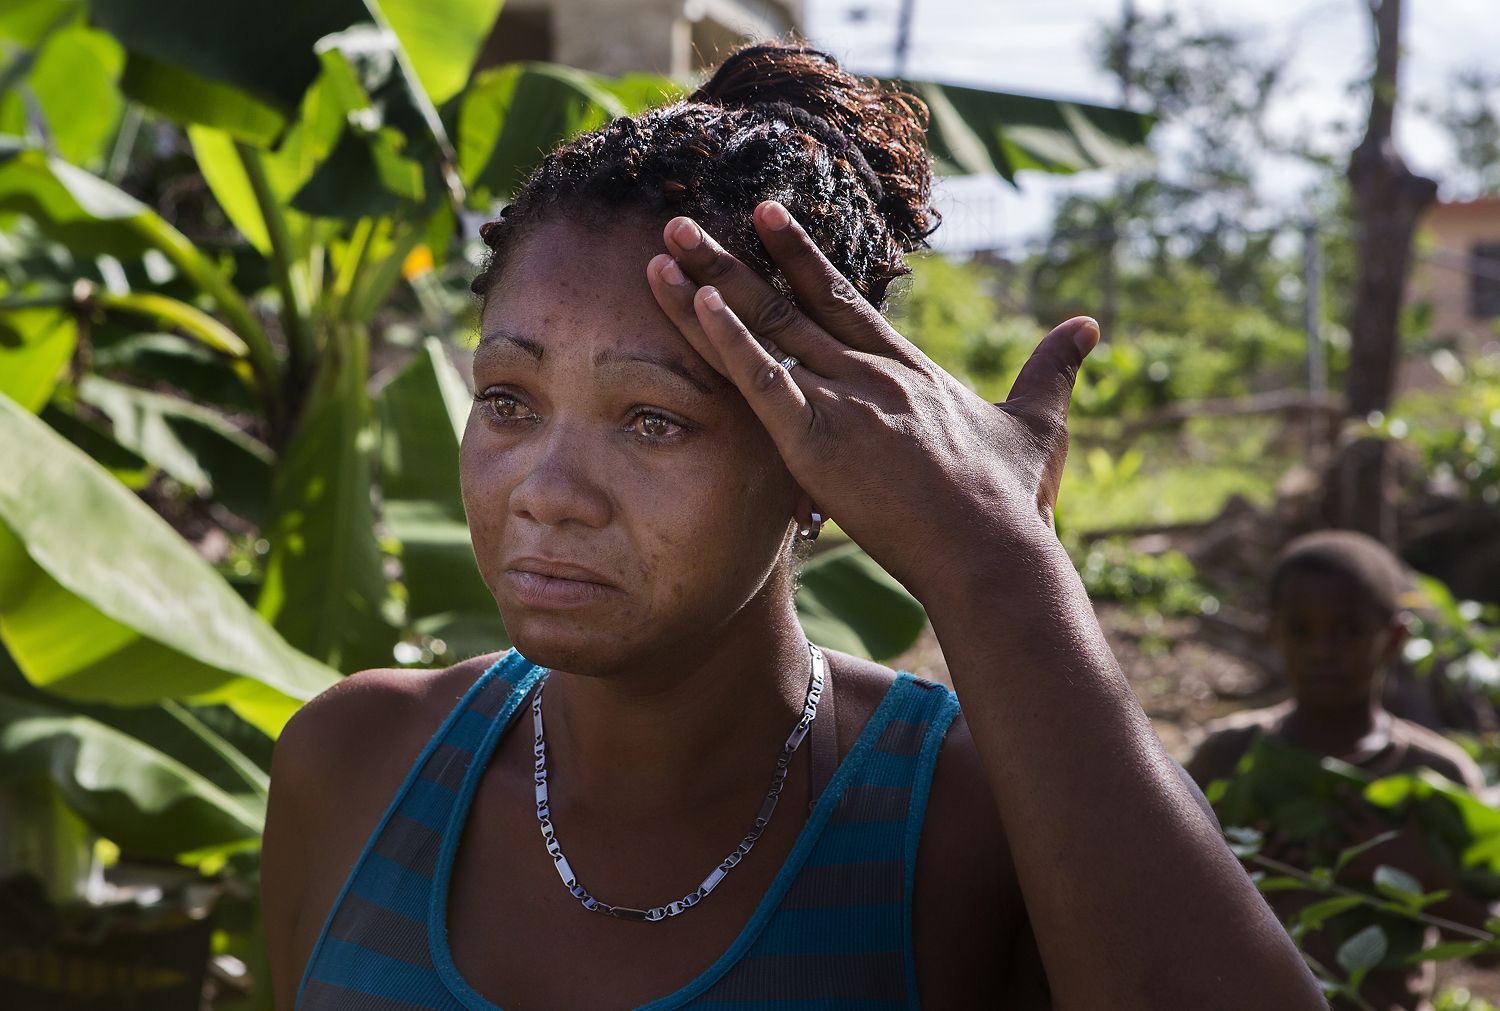 Rosalda Olma, a wife and mother to three kids, begins to tear up while sorting through what remains of her home in Loiza. The entire home and contents were destroyed by the hurricane, and the family is living in a nearby school for the time being. “It’s hard getting used to these living conditions,” she said. “All five of us are trying to fit inside a single room.” Image by Ryan Michalesko. Puerto Rico, 2017. 